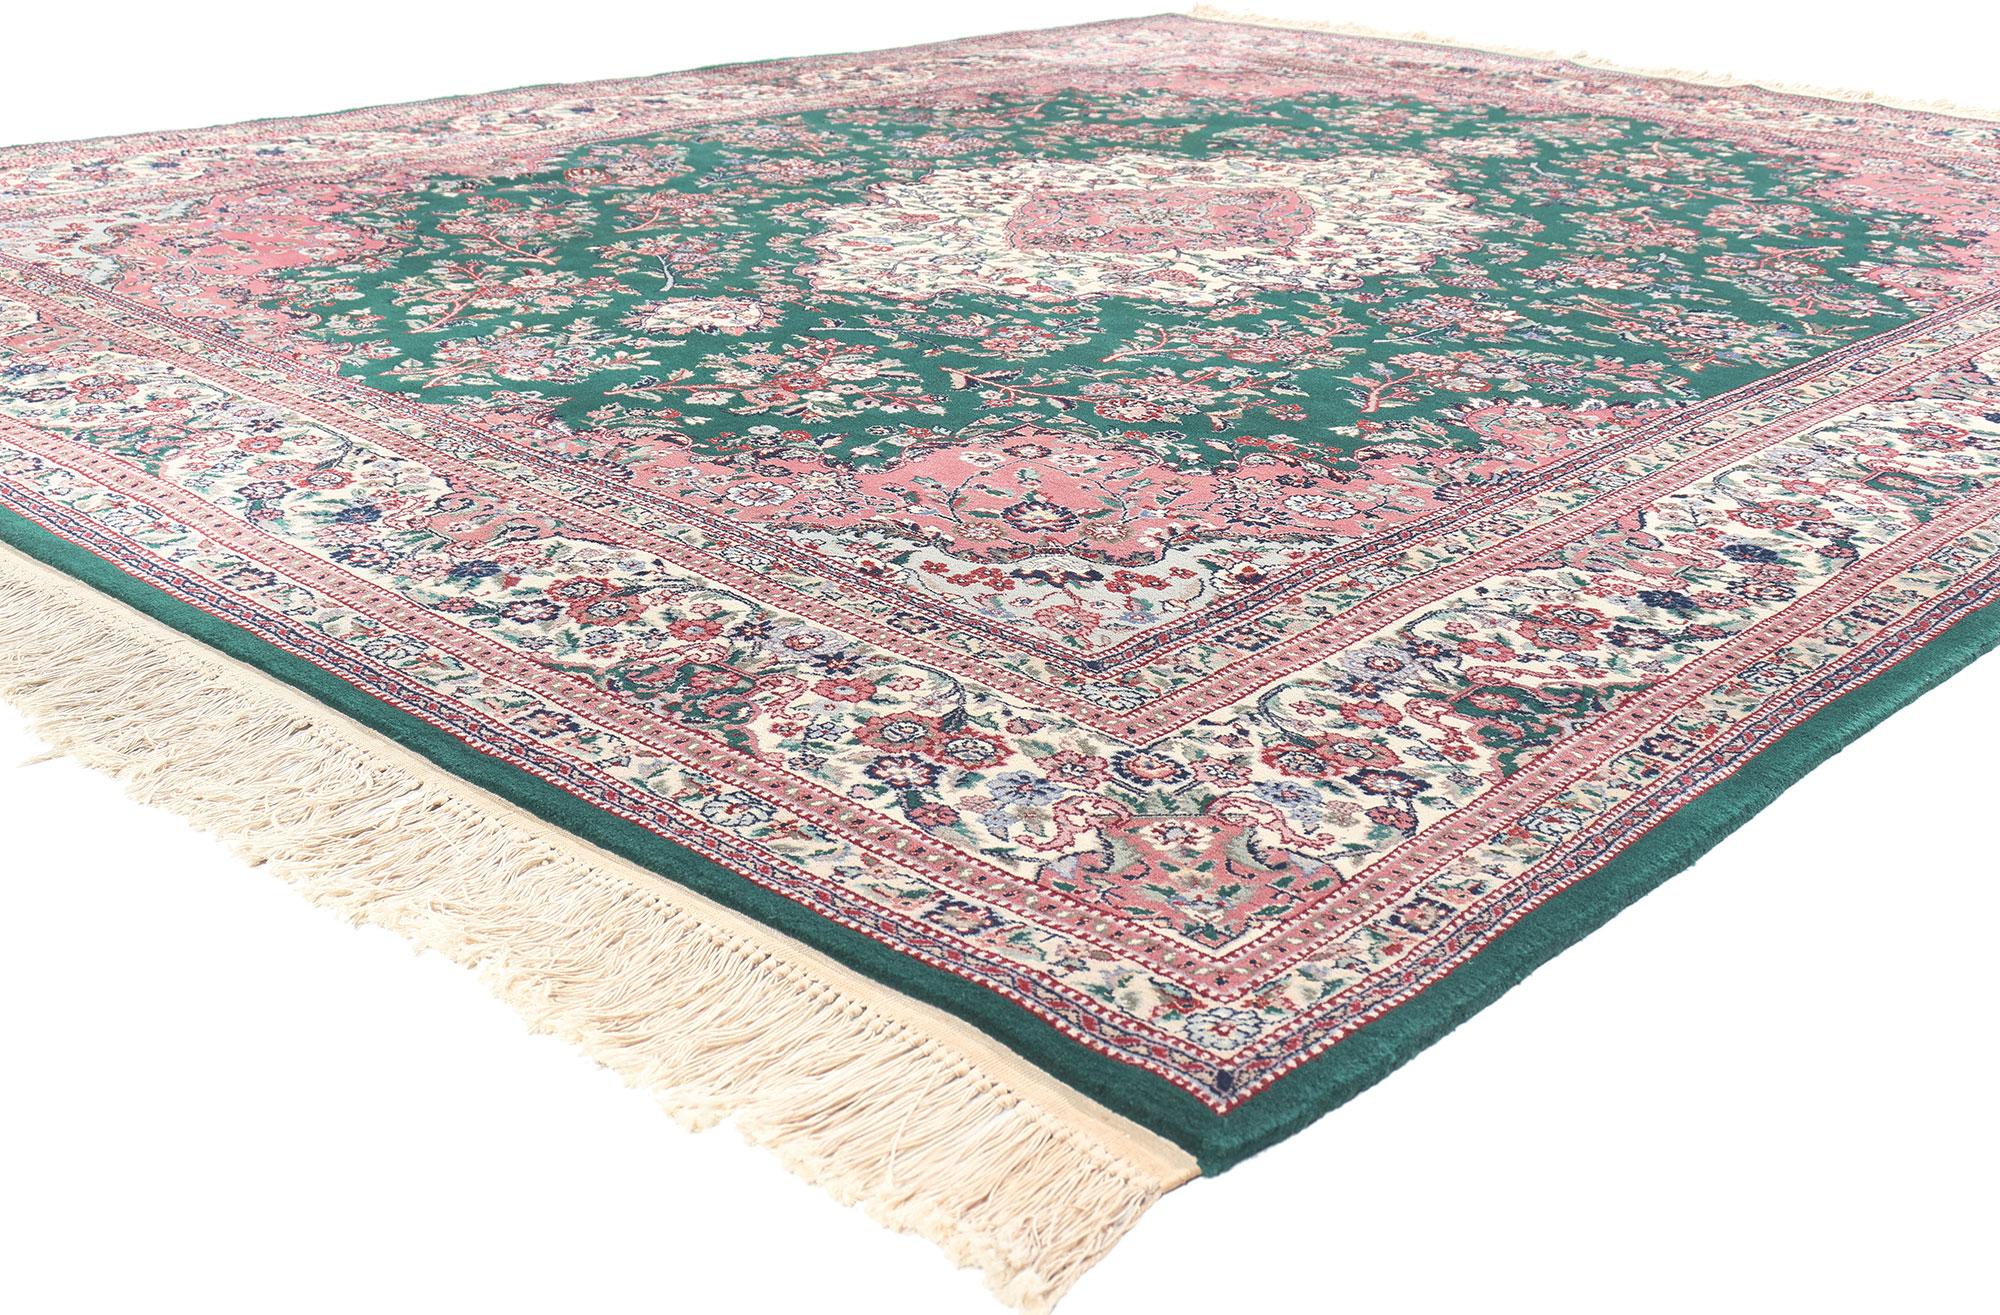 78669 Vintage Chinese Wool and Silk Tabriz Rug, 08'00 x 10'01. In the seamless union of maximalist opulence and relaxed refinement, behold the exquisite allure of this hand-knotted vintage Chinese Tabriz rug in sumptuous wool and silk. The elaborate